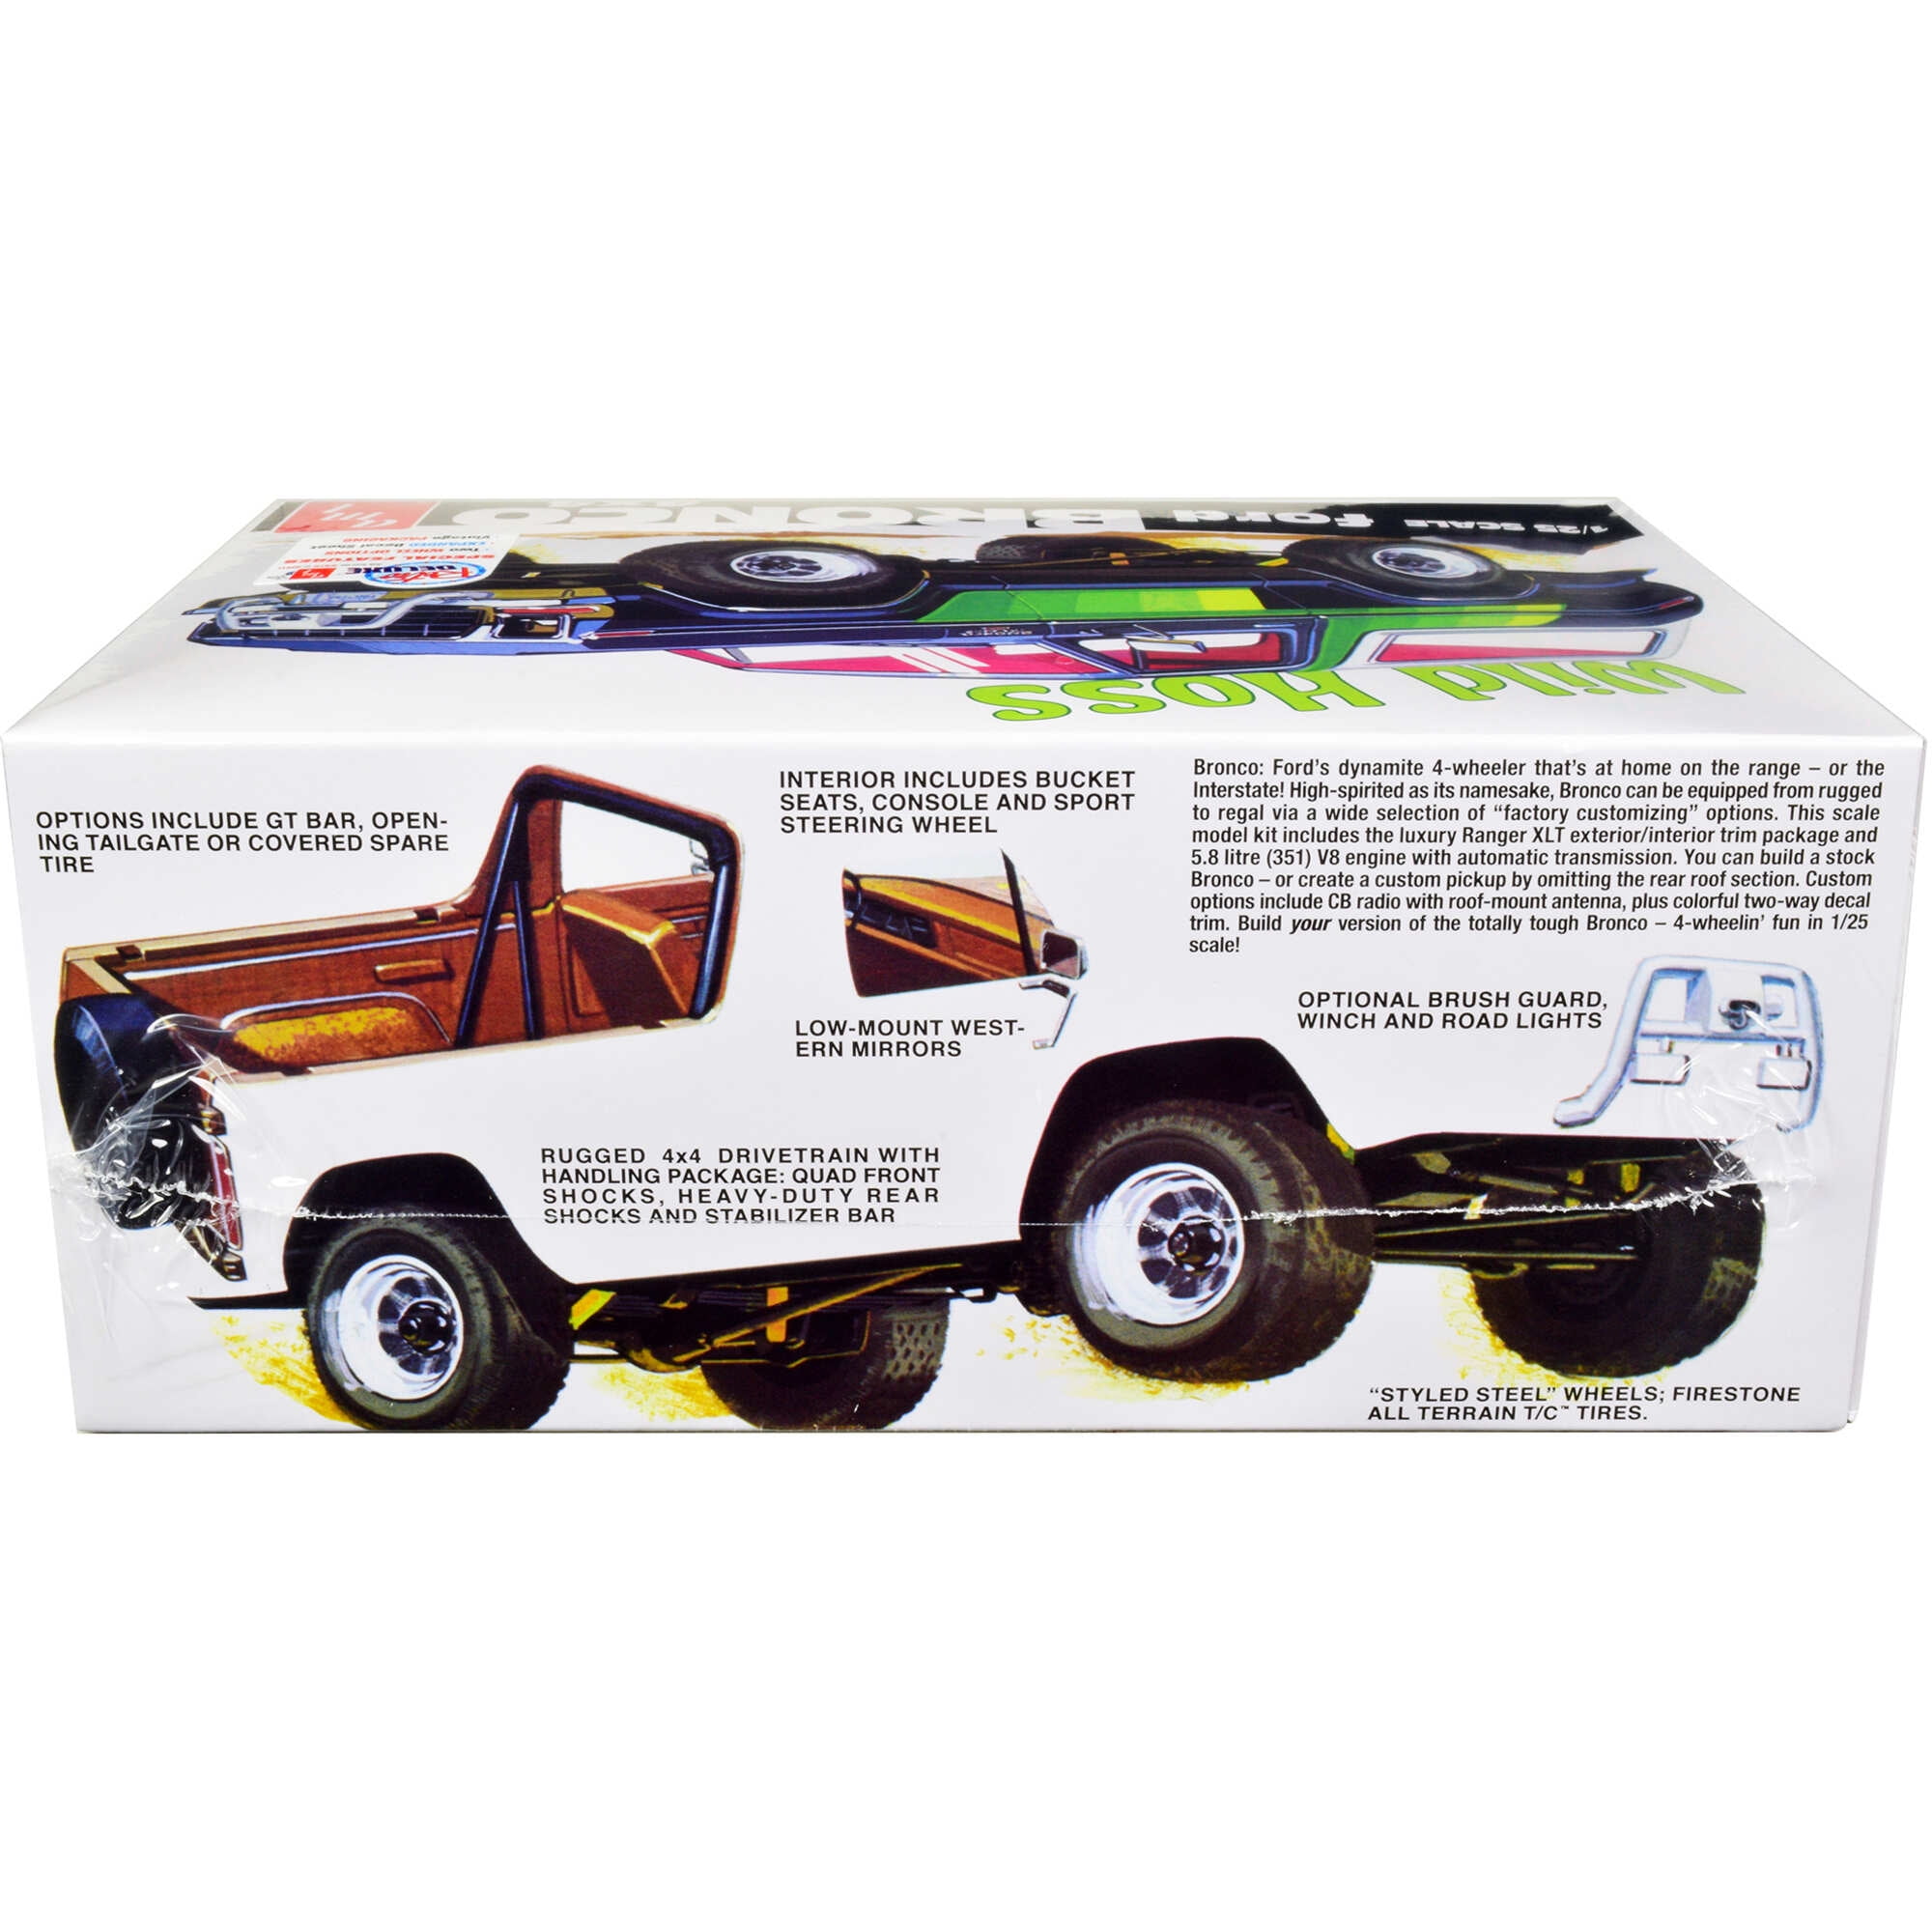 Picture of AMT AMT1304 Skill 2 Model Kit - 1 by 25 Scale Model for Ford Bronco 4X4 Wild Hoss